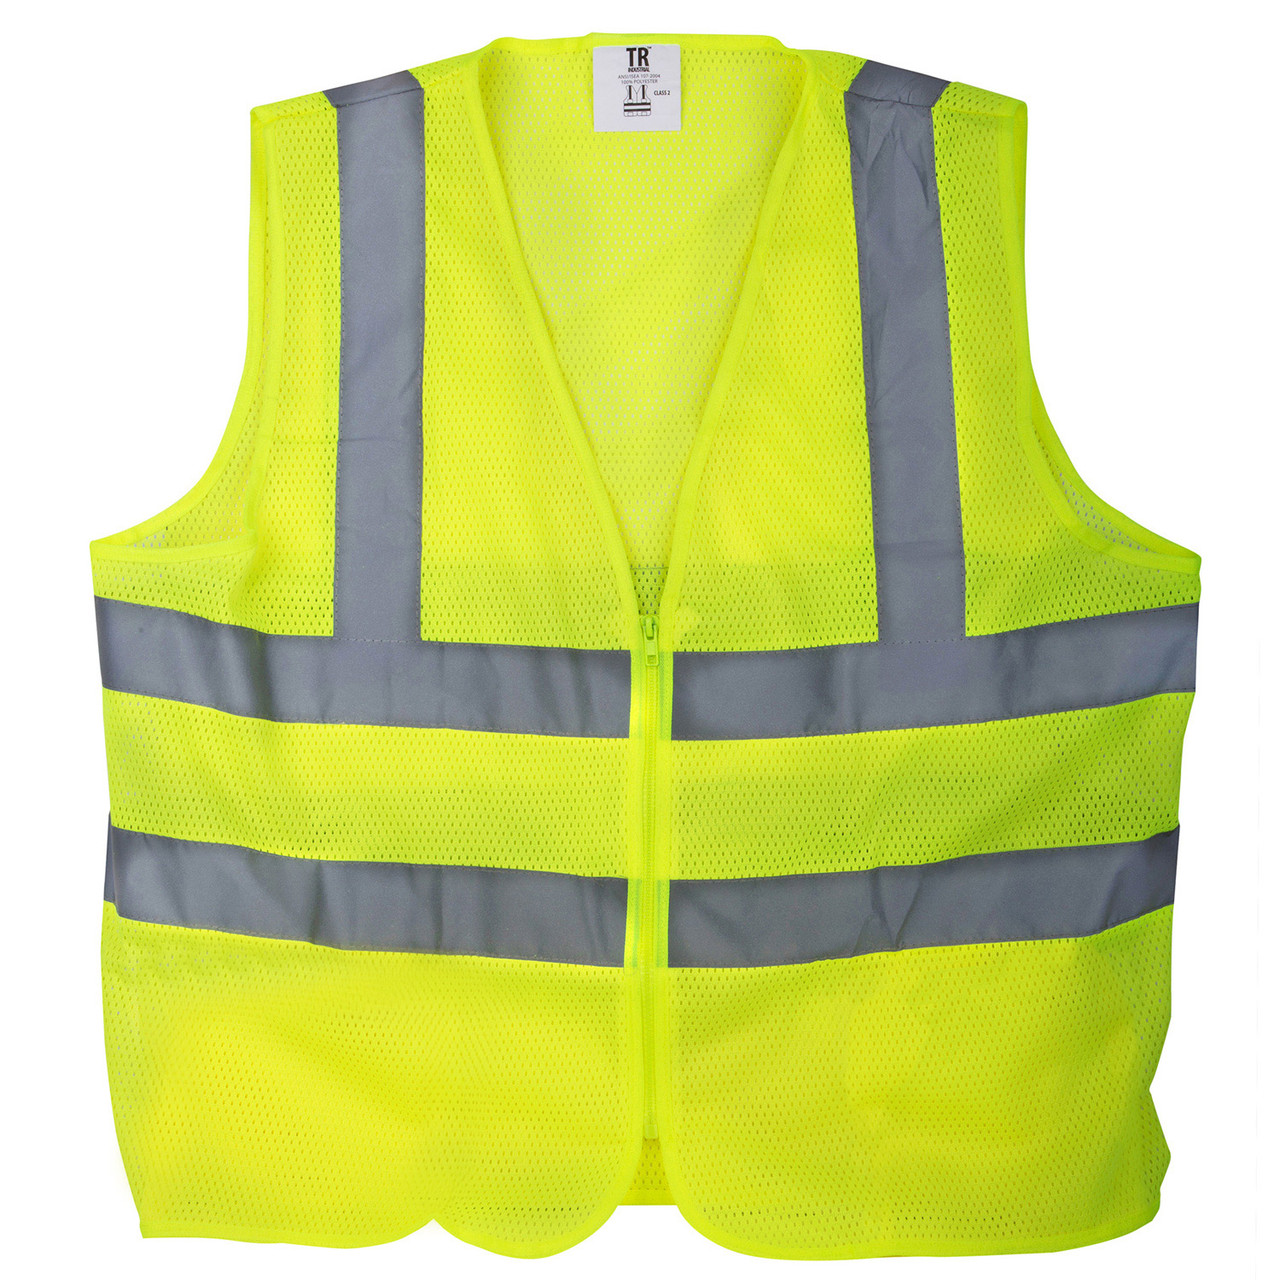 TR Industrial Yellow Mesh High Visibility Reflected Class 2 Safety Vest, No Pockets, Size XXXL